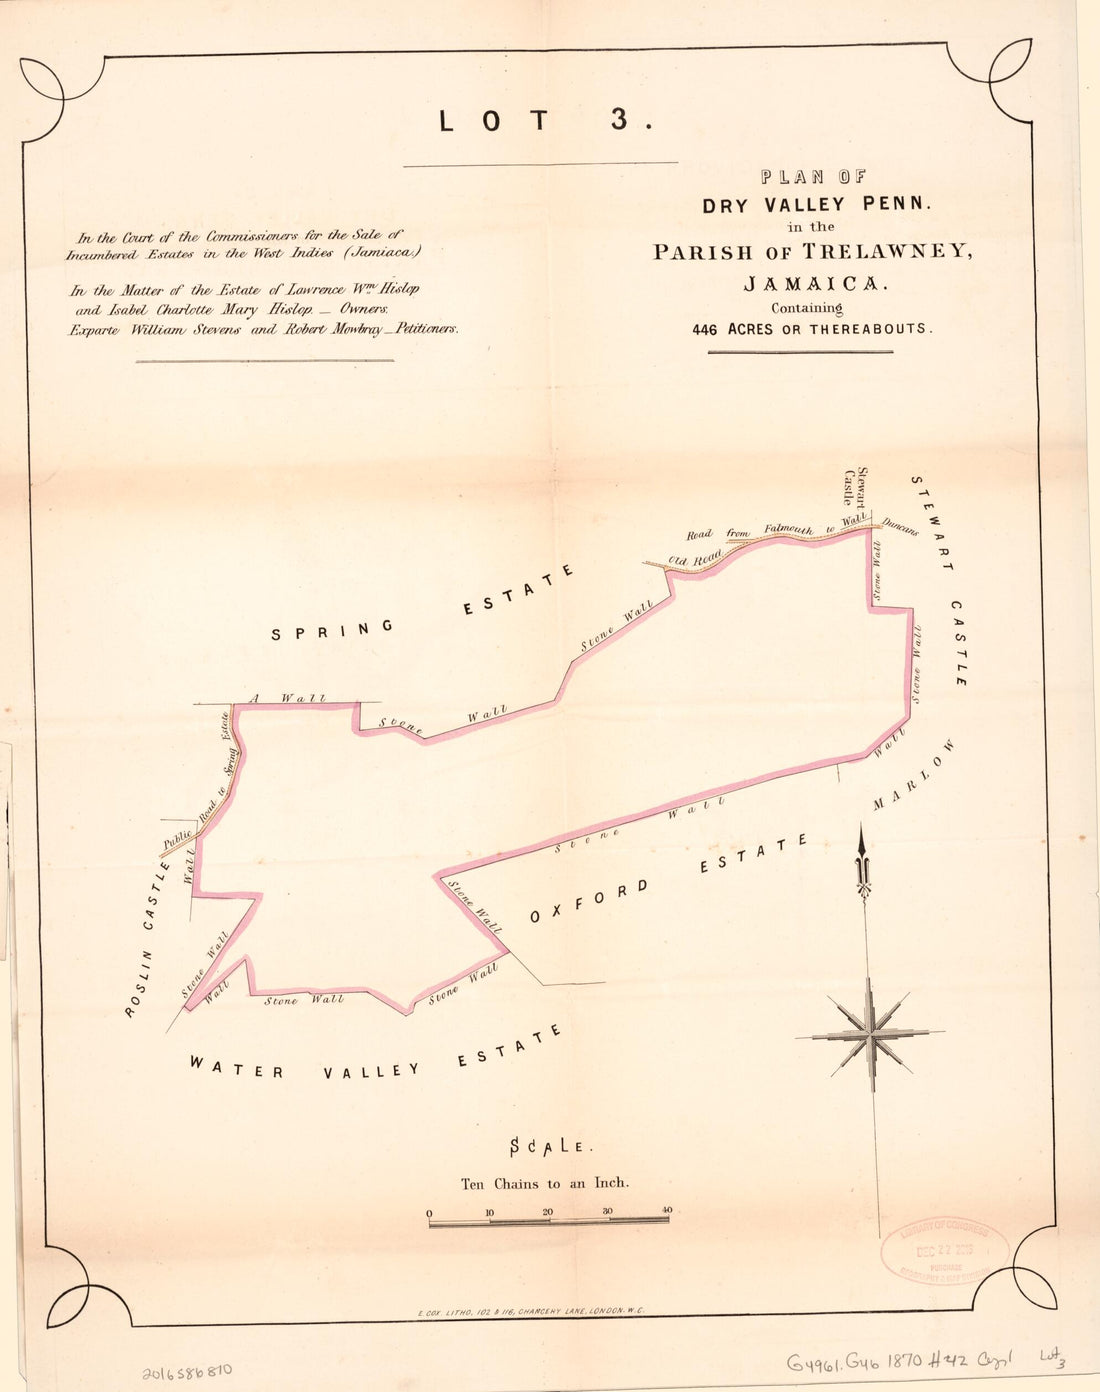 This old map of Lot 3. Plan of Dry Valley Penn. from Encumbered Estates In the West Indies (Jamaica) from 1870 was created by Vaughan &amp; Leifchild (Firm) Hards in 1870